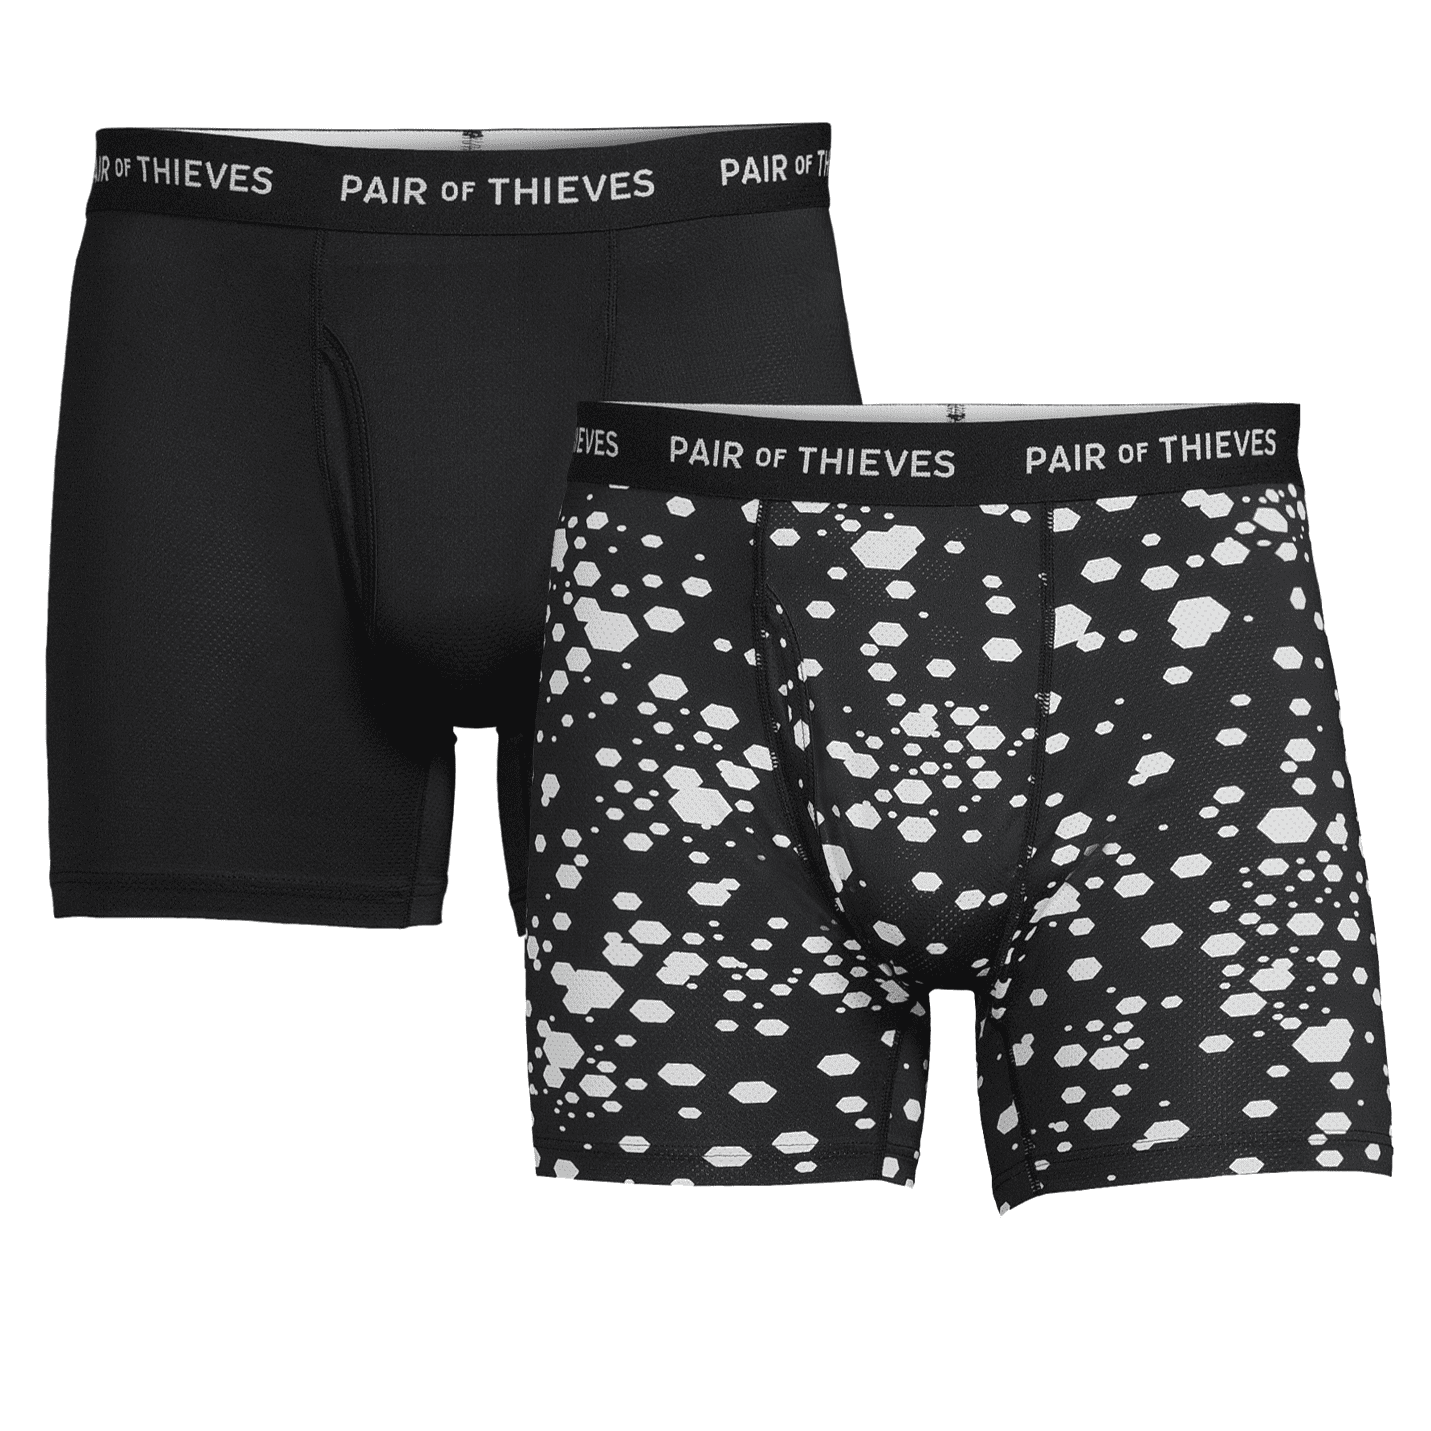 Pair of Thieves, Underwear & Socks, Nwt Pair Of Thieves Superfit 2pack  Adult Mens Boxer Briefs Mens Small